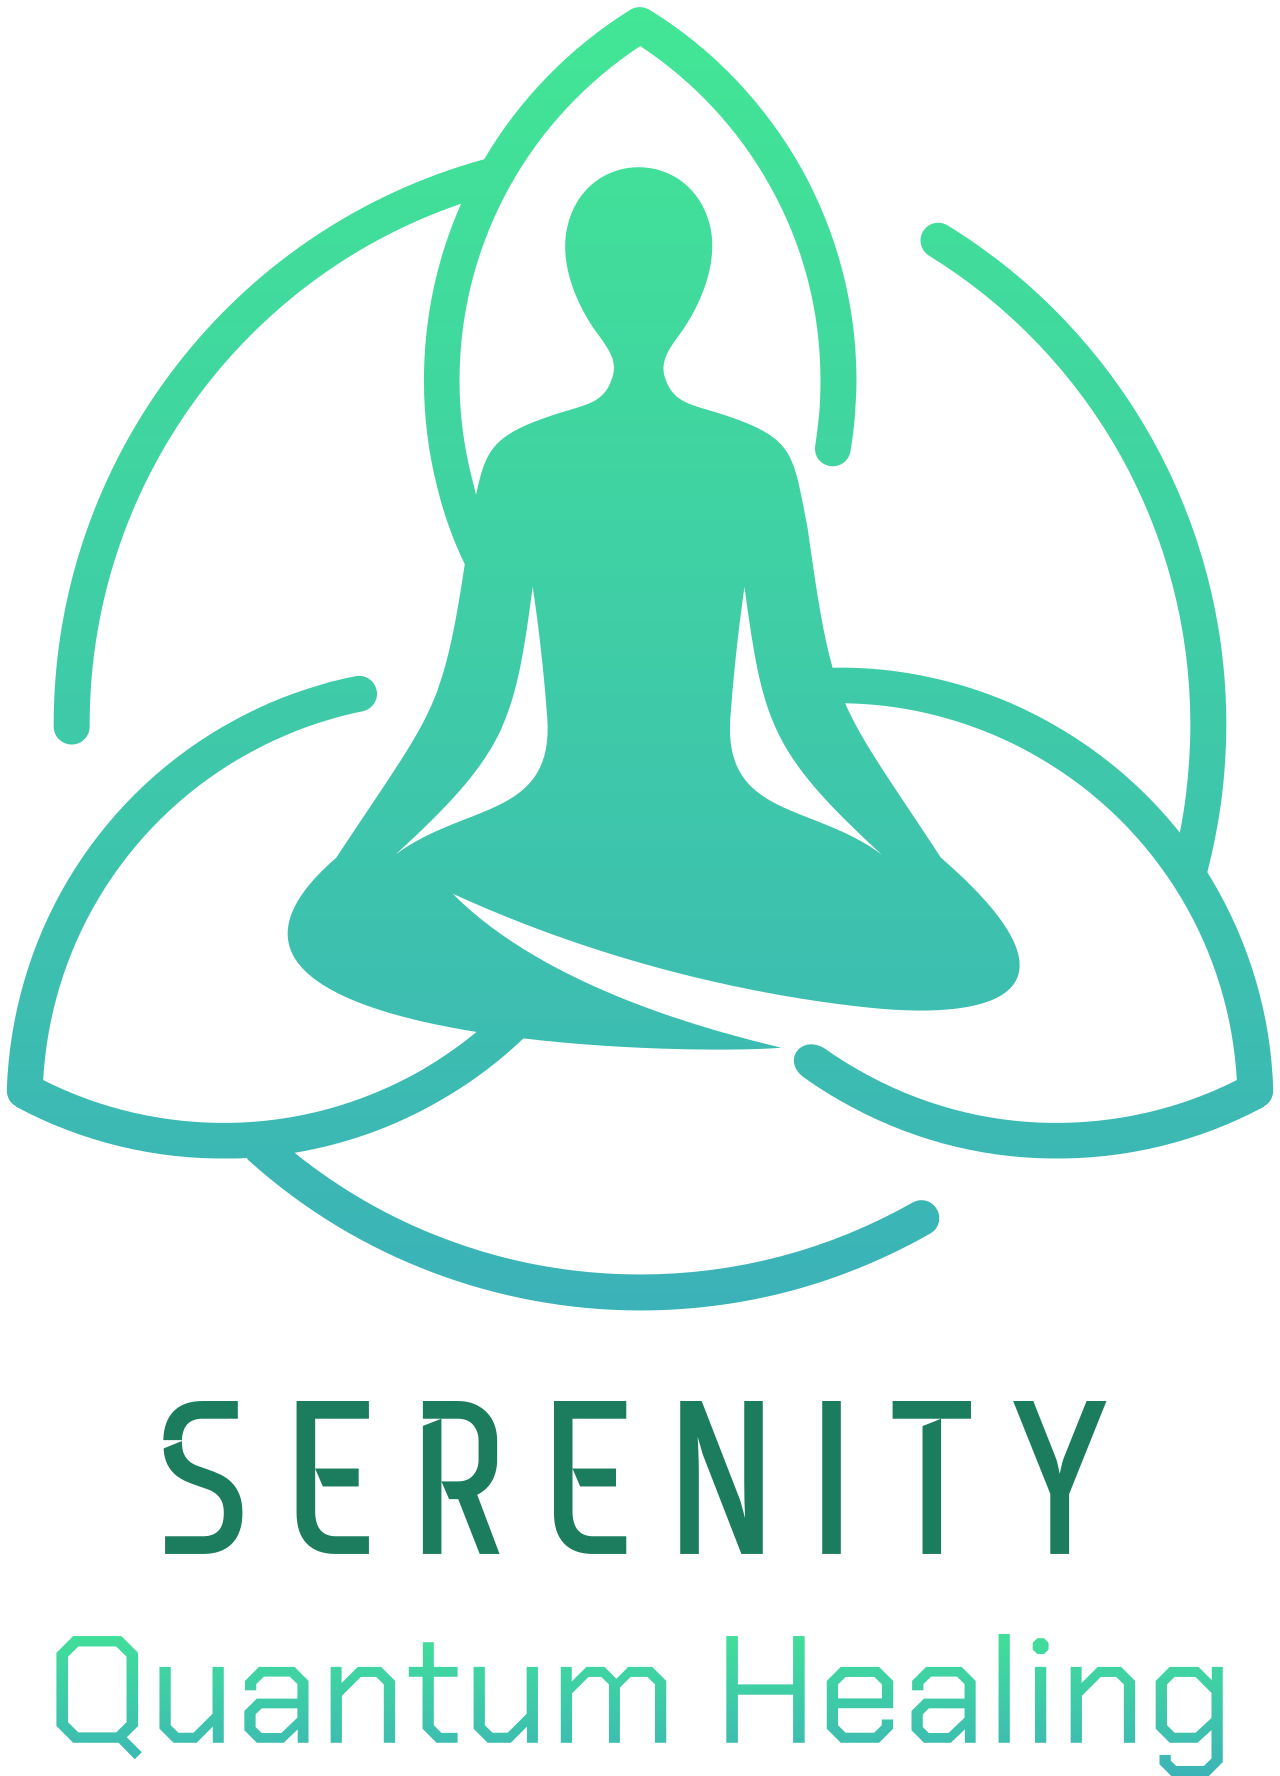 SERENITY 's web page